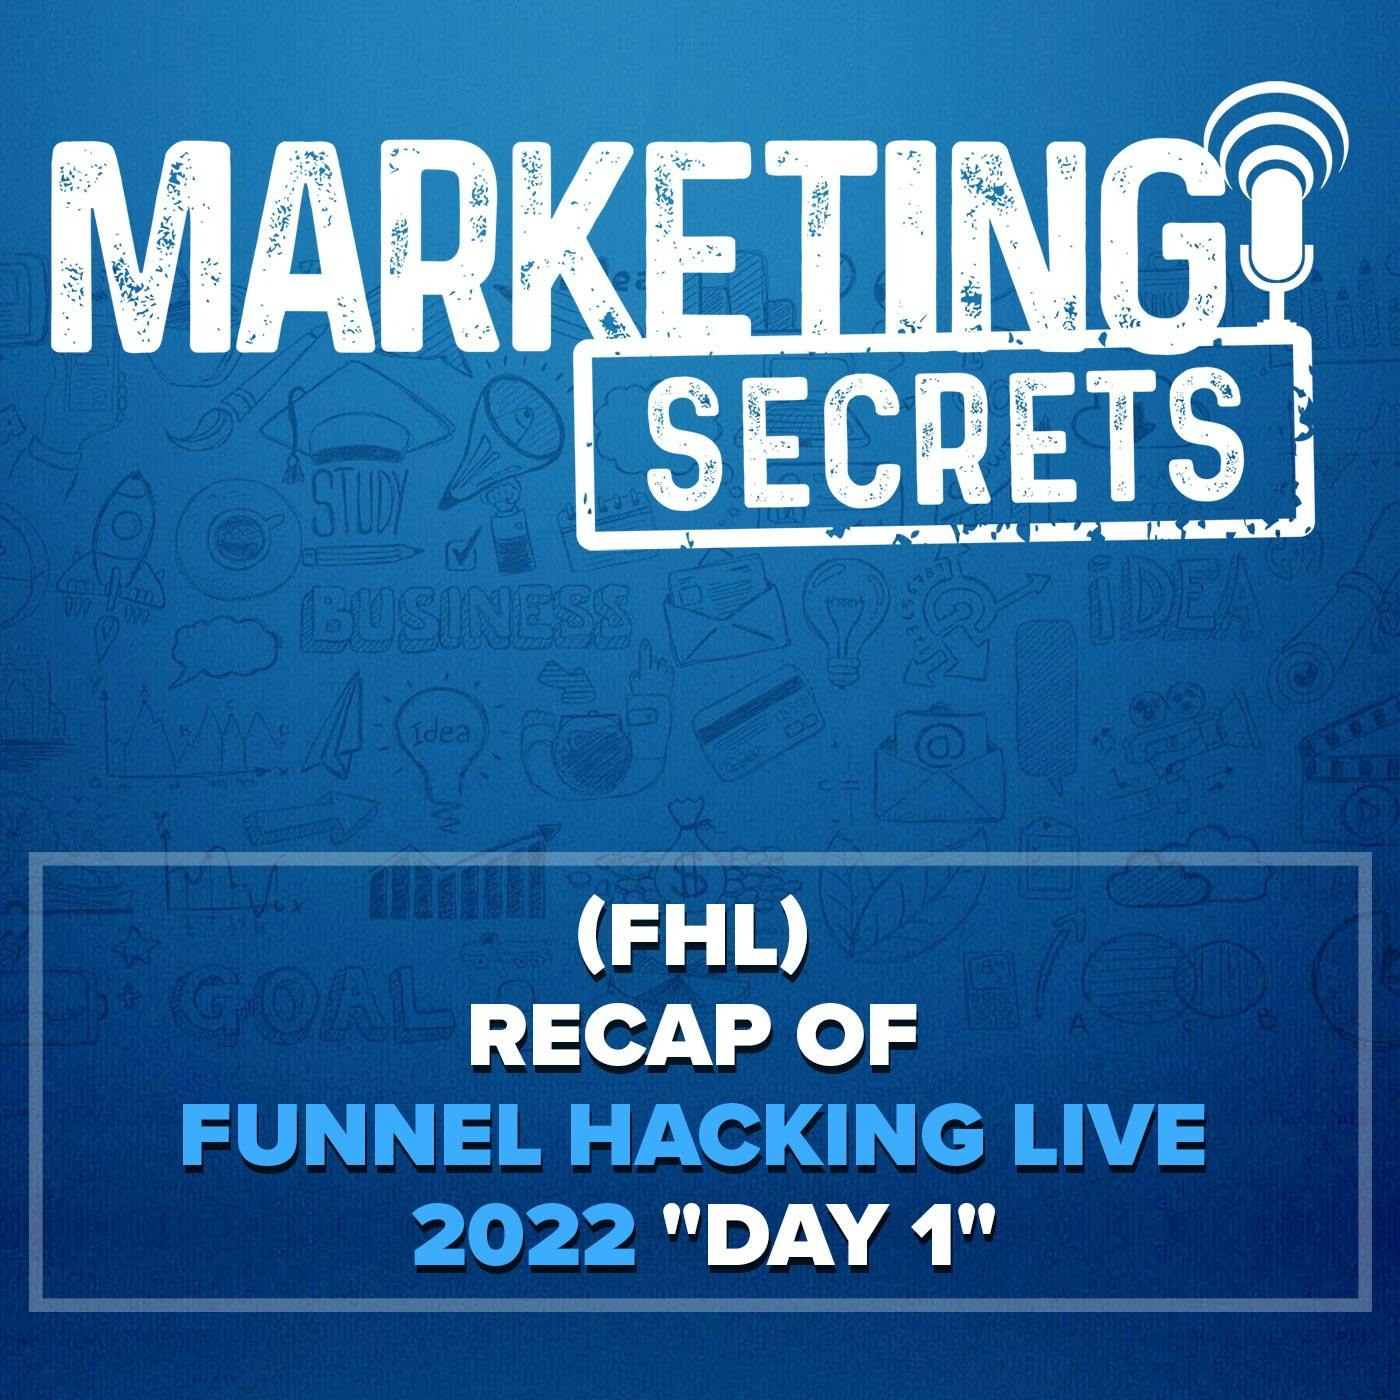 (FHL) Recap of Funnel Hacking Live 2022 "Day 1" by Russell Brunson